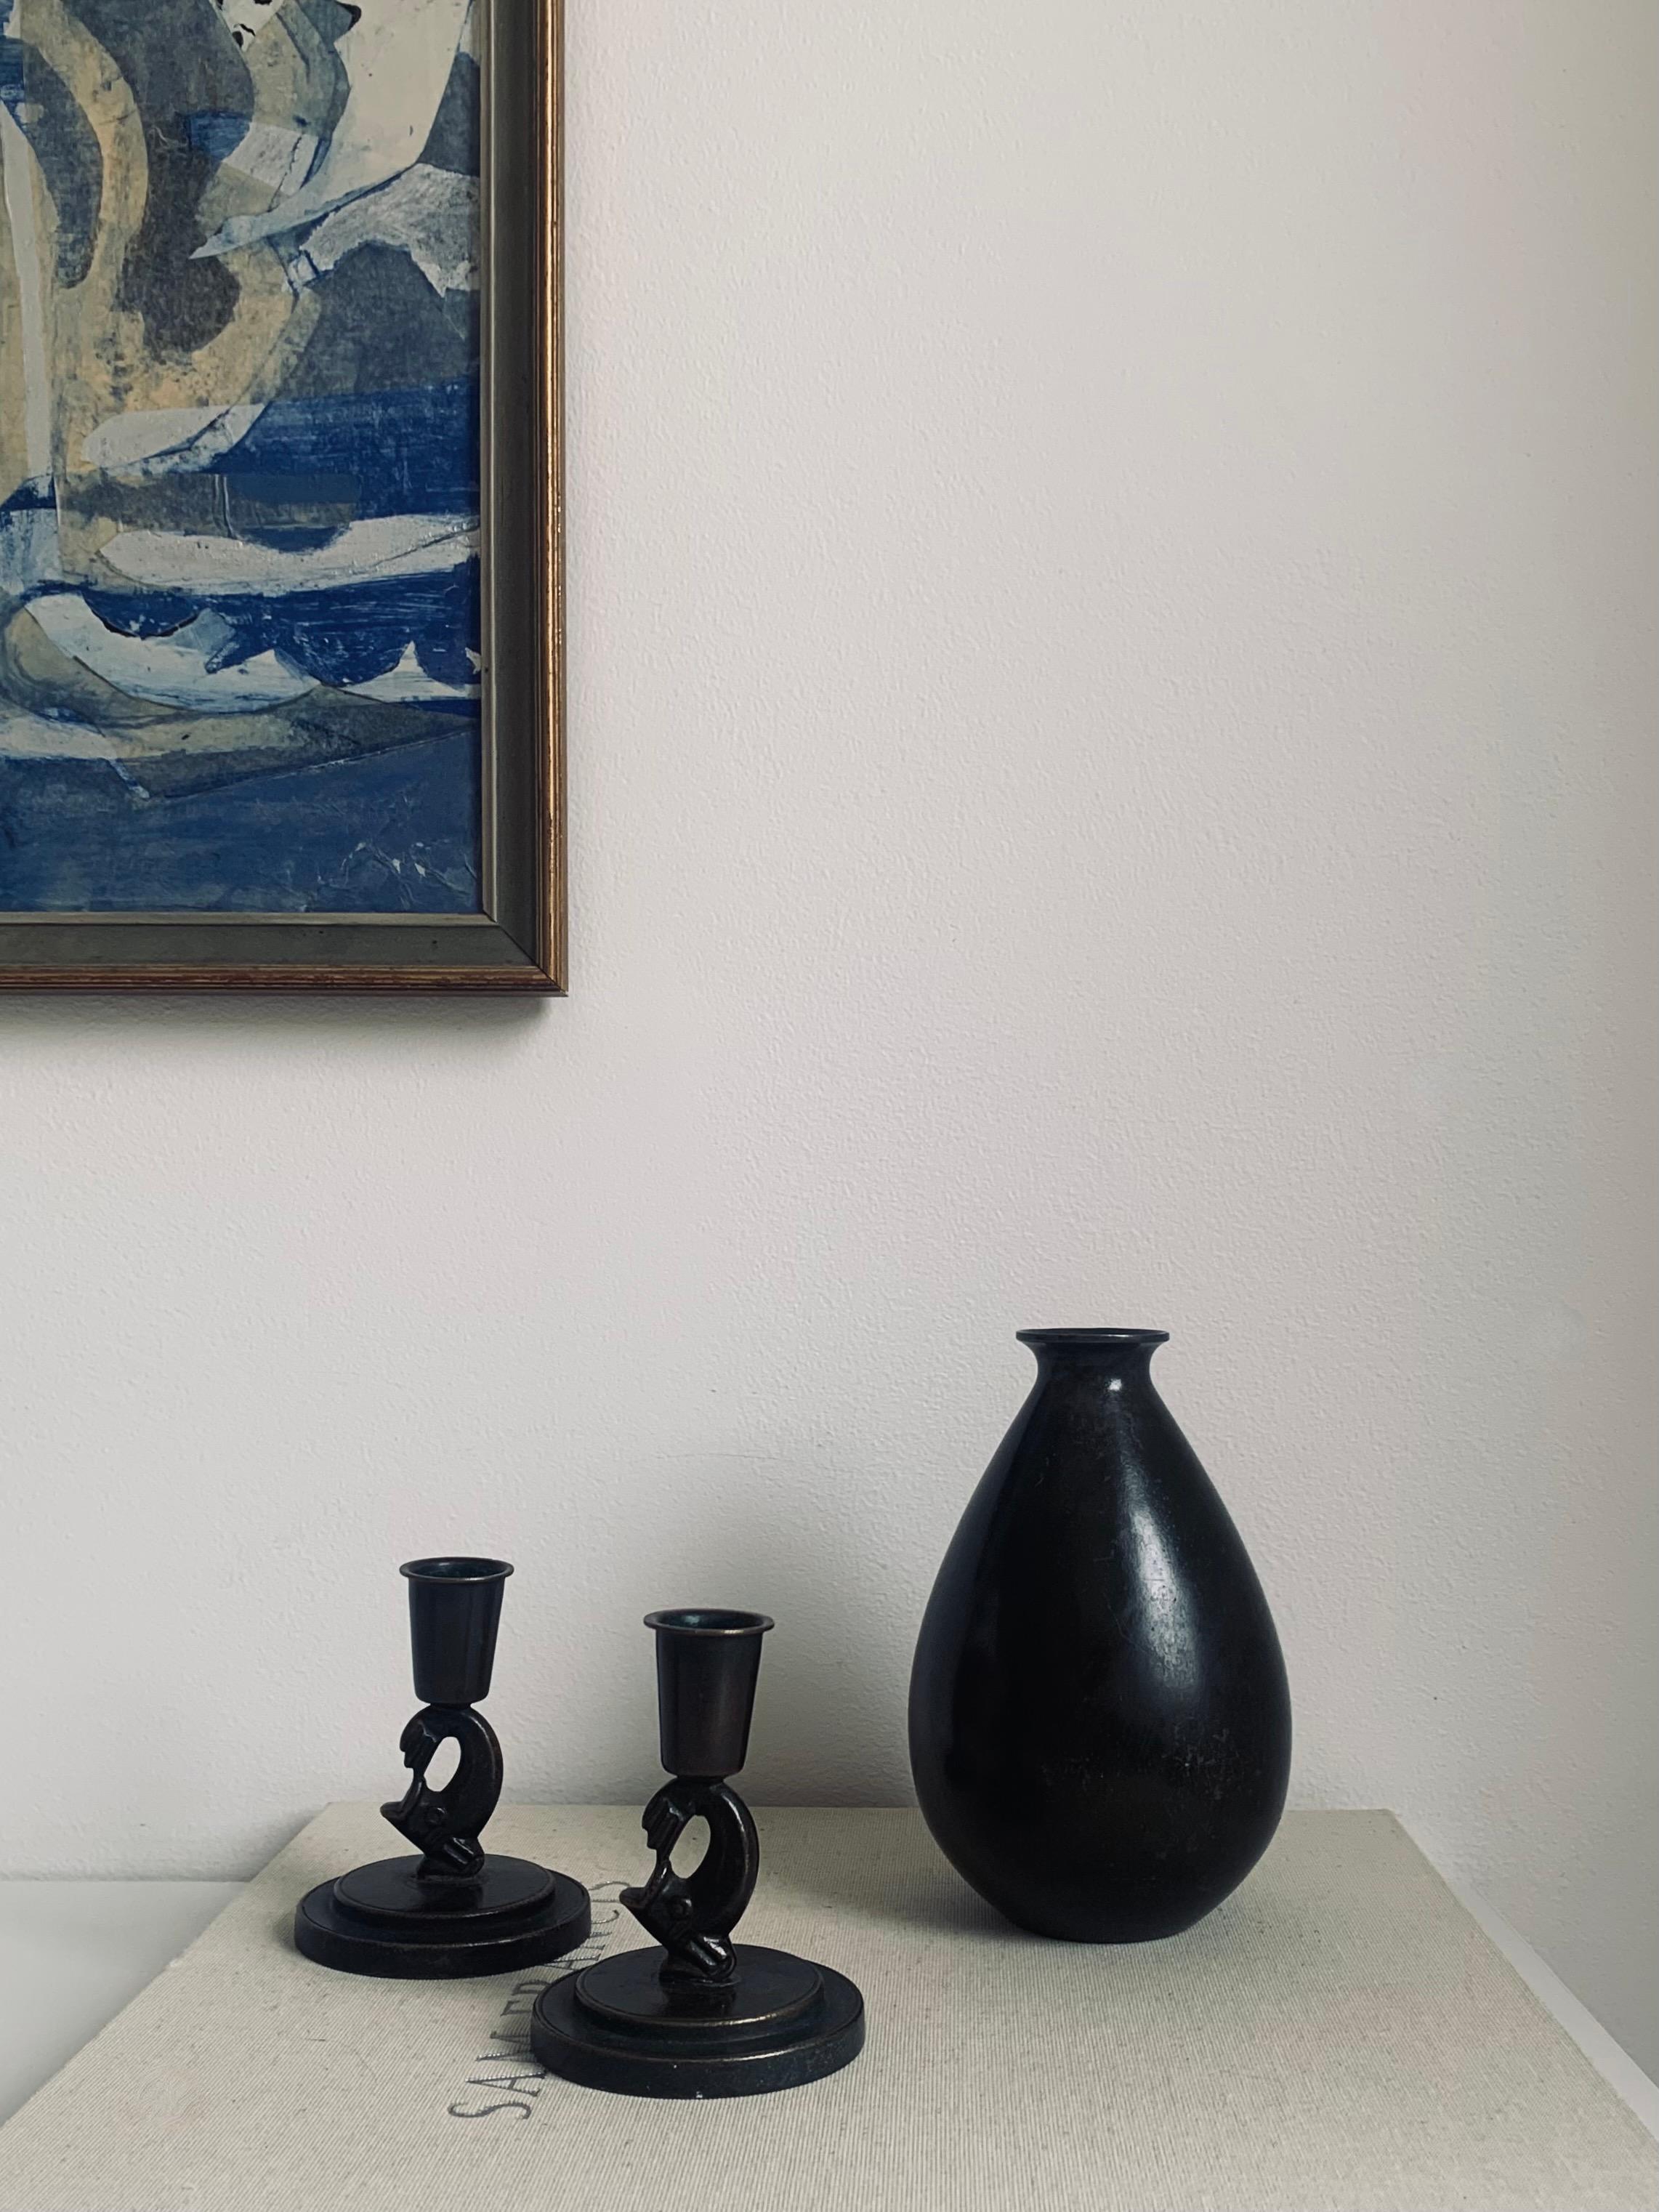 Cast Swedish Modern Patinated Bronze Candle Sticks by Ystad Brons, 1930s